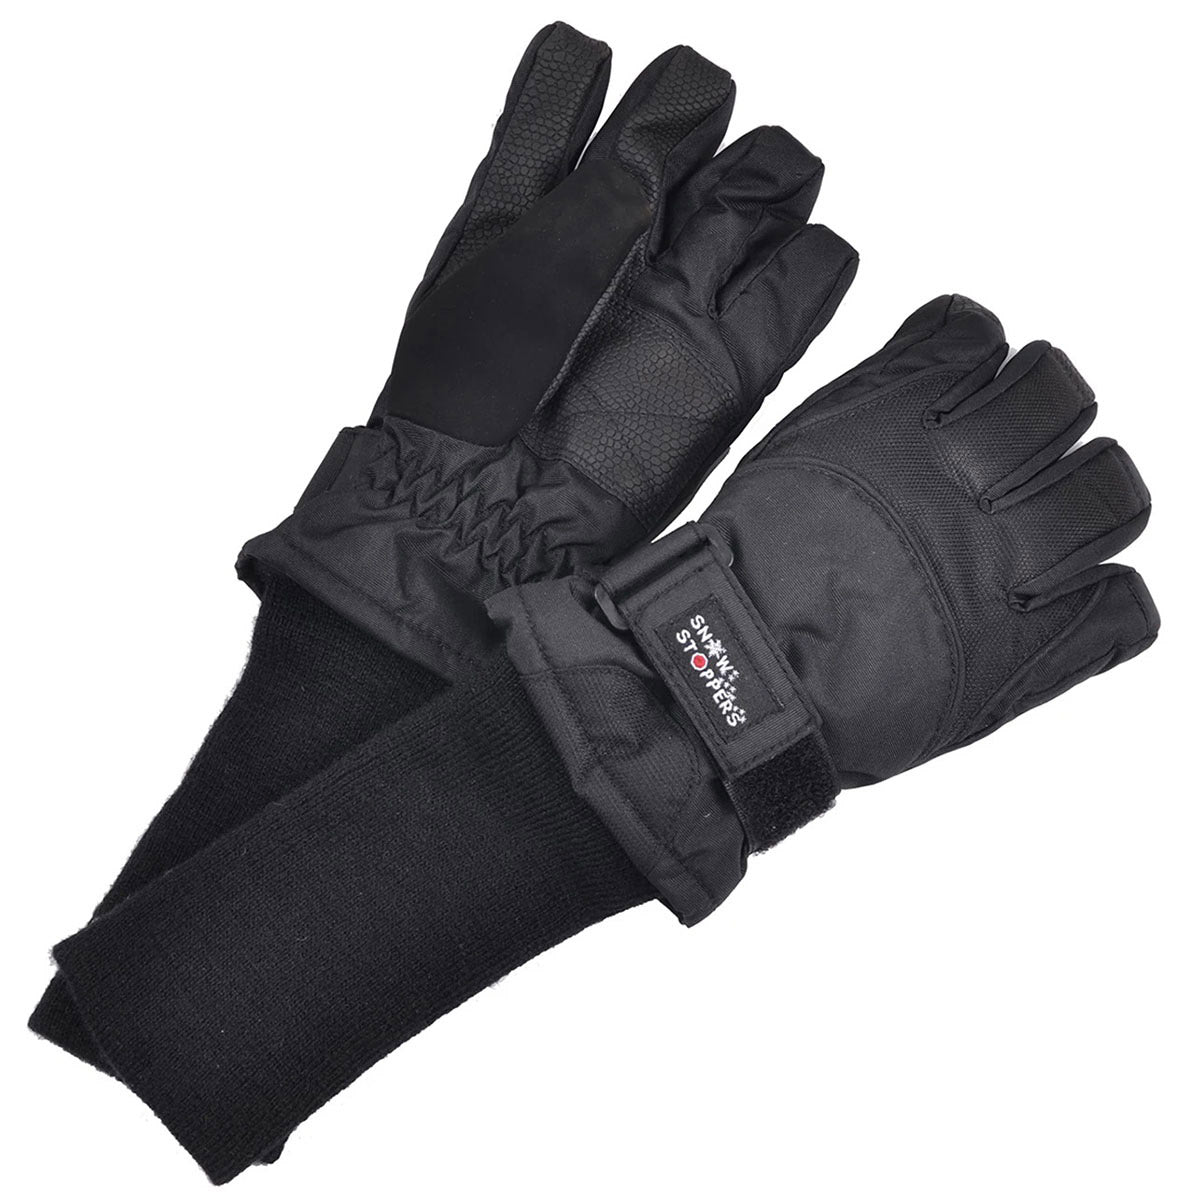 A pair of SNOWSTOPPERS KIDS GLOVE BLACK with extended wrist cuffs featuring Thinsulate 40 Gram Insulation.